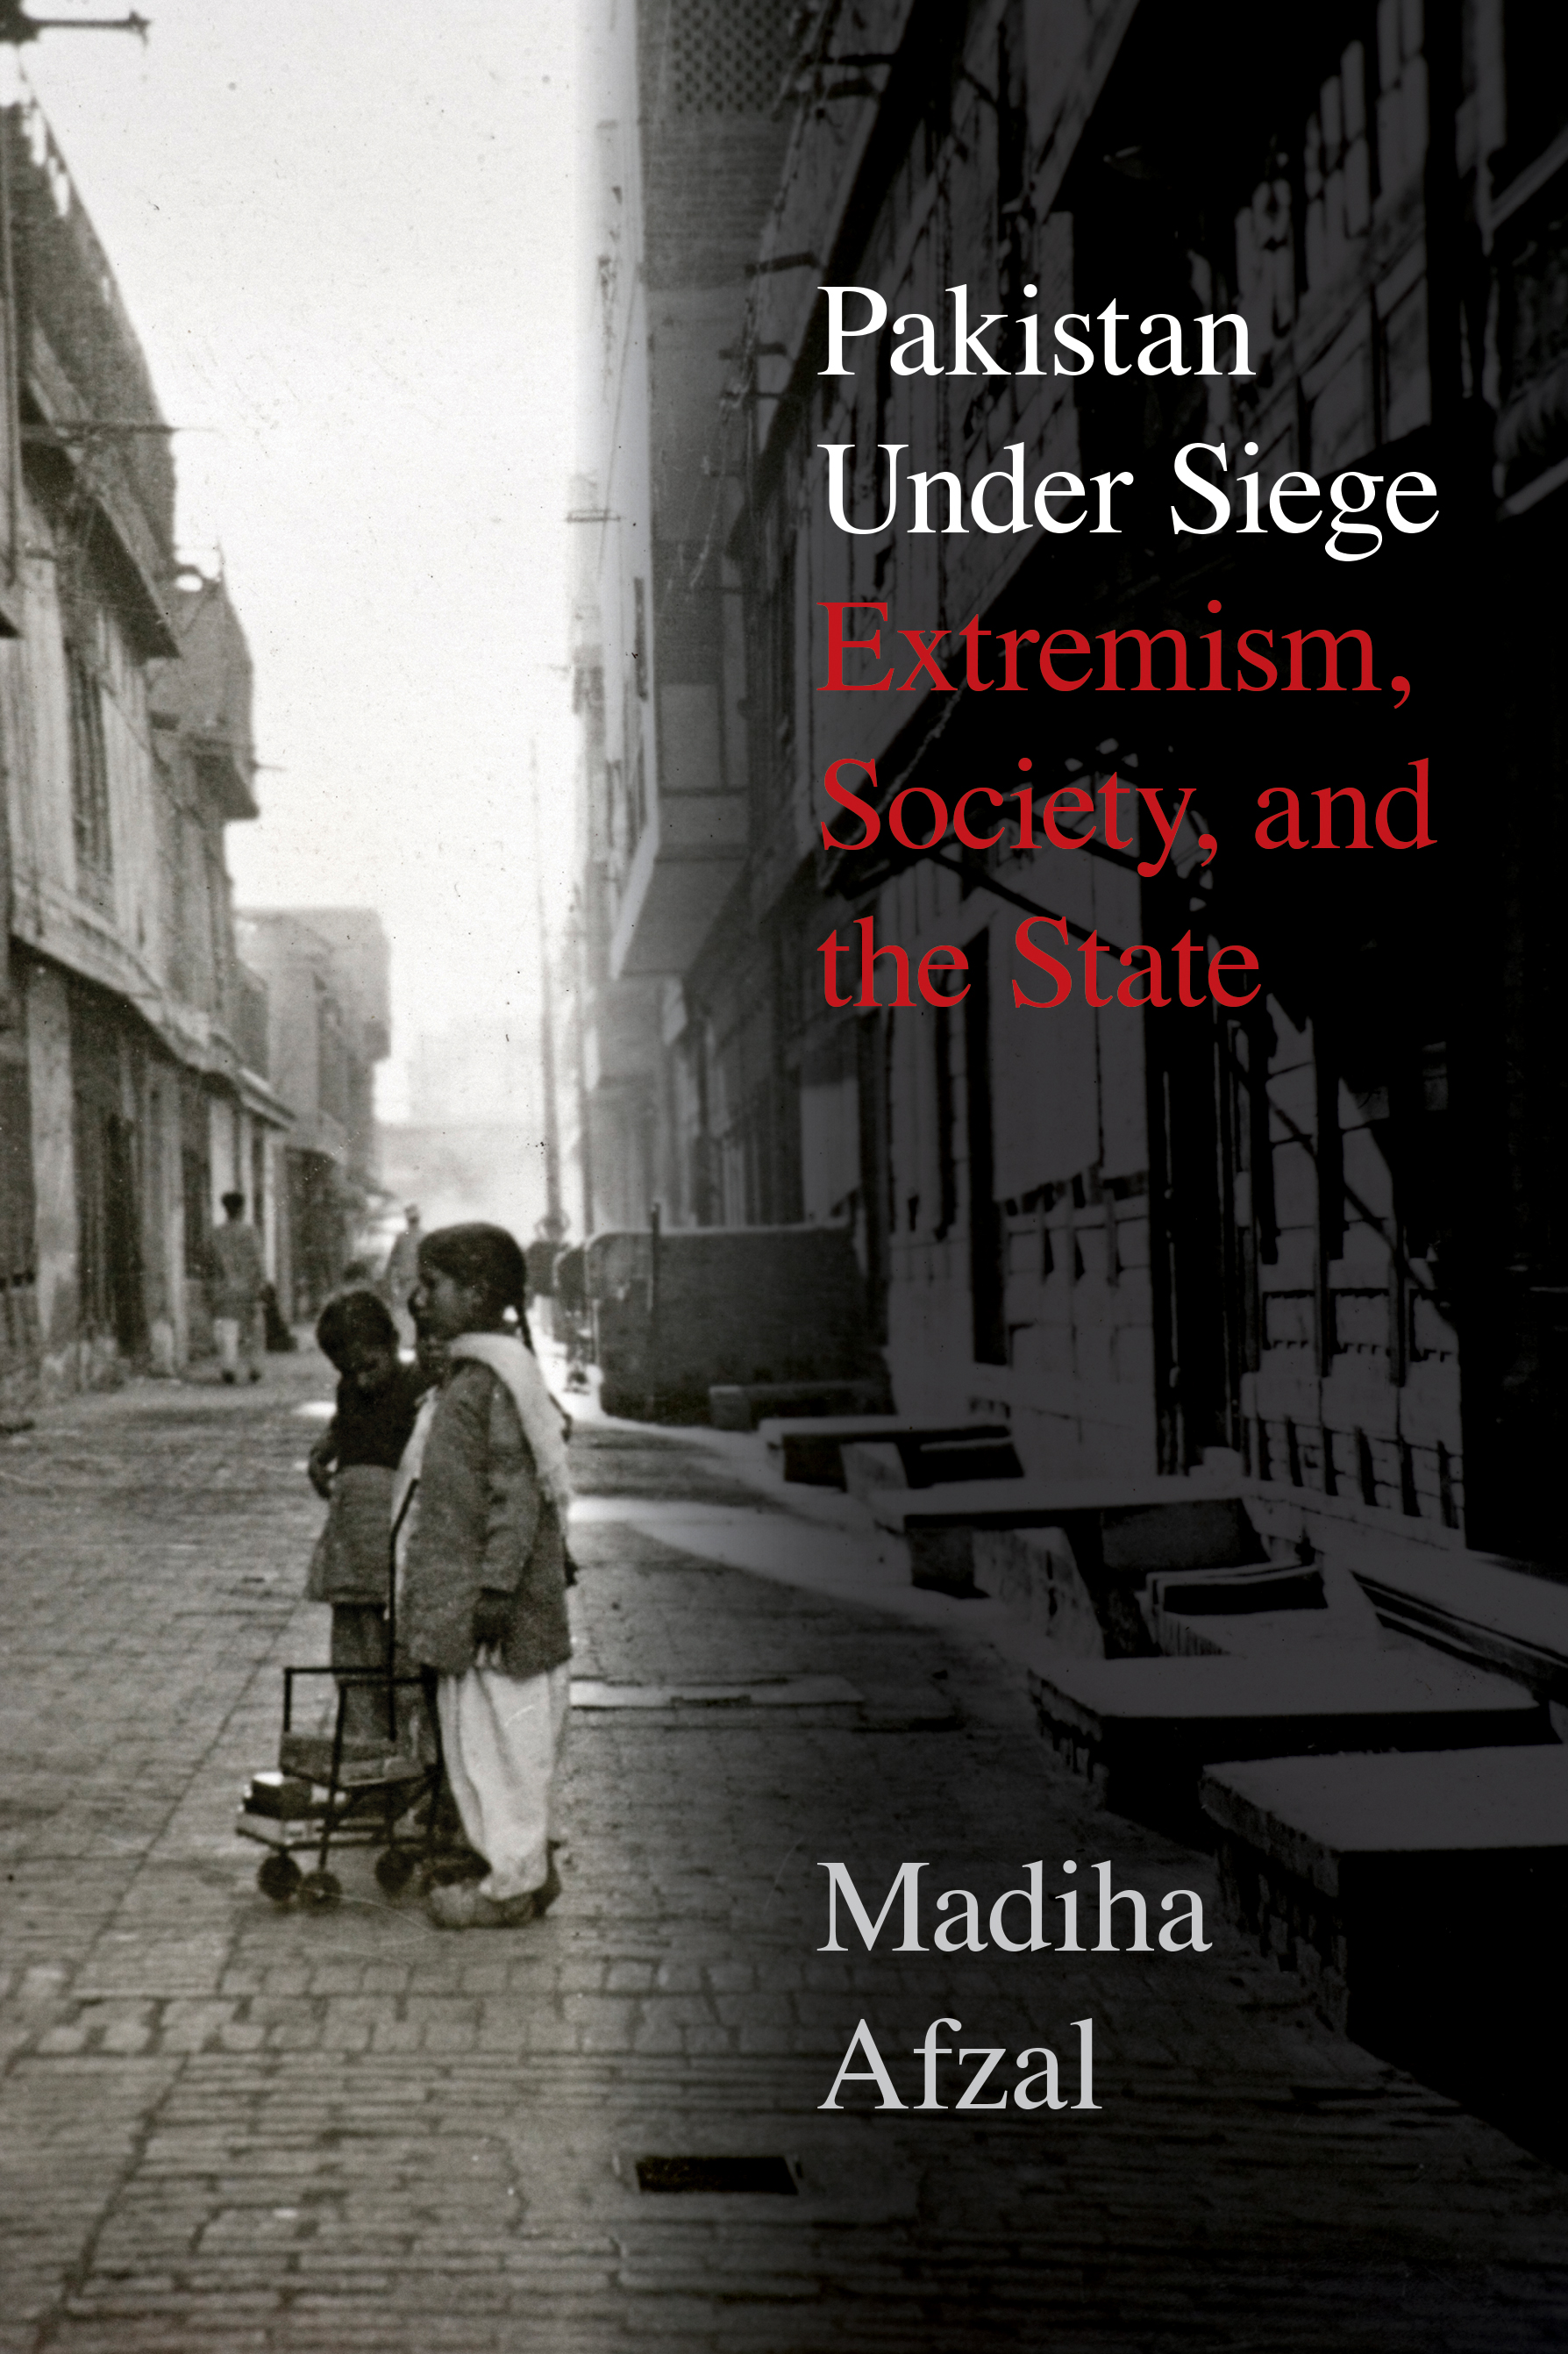 Pakistan Under Siege: Extremism, Society, and the State